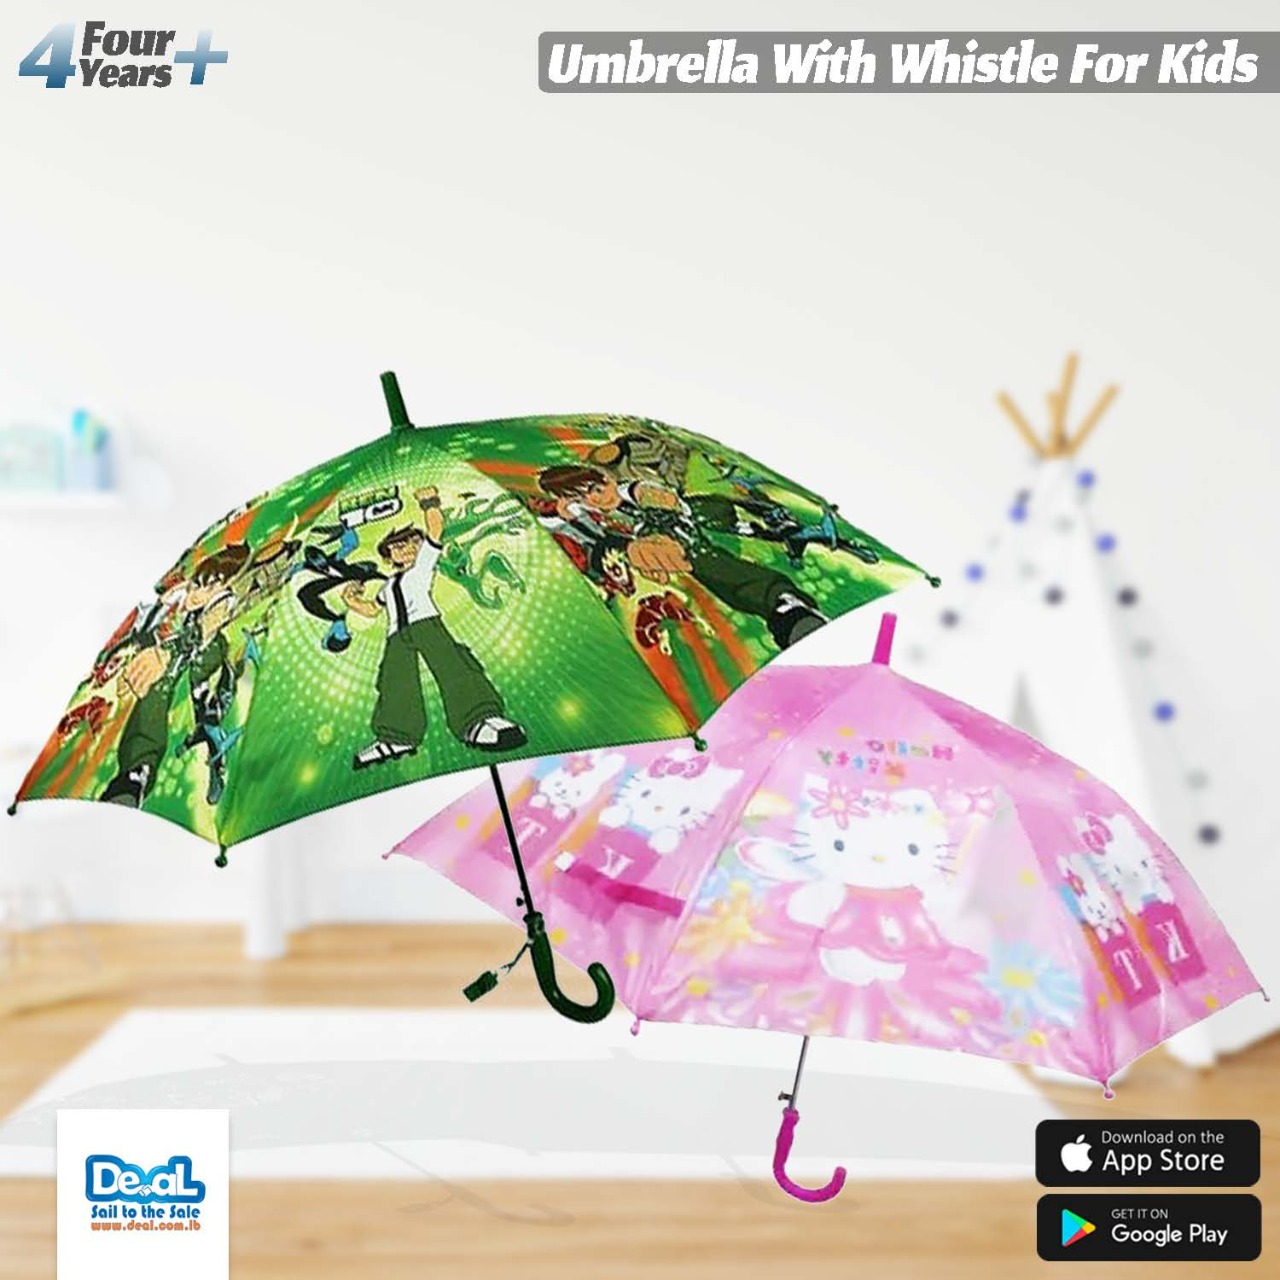 Umbrella With Whistle For Kids